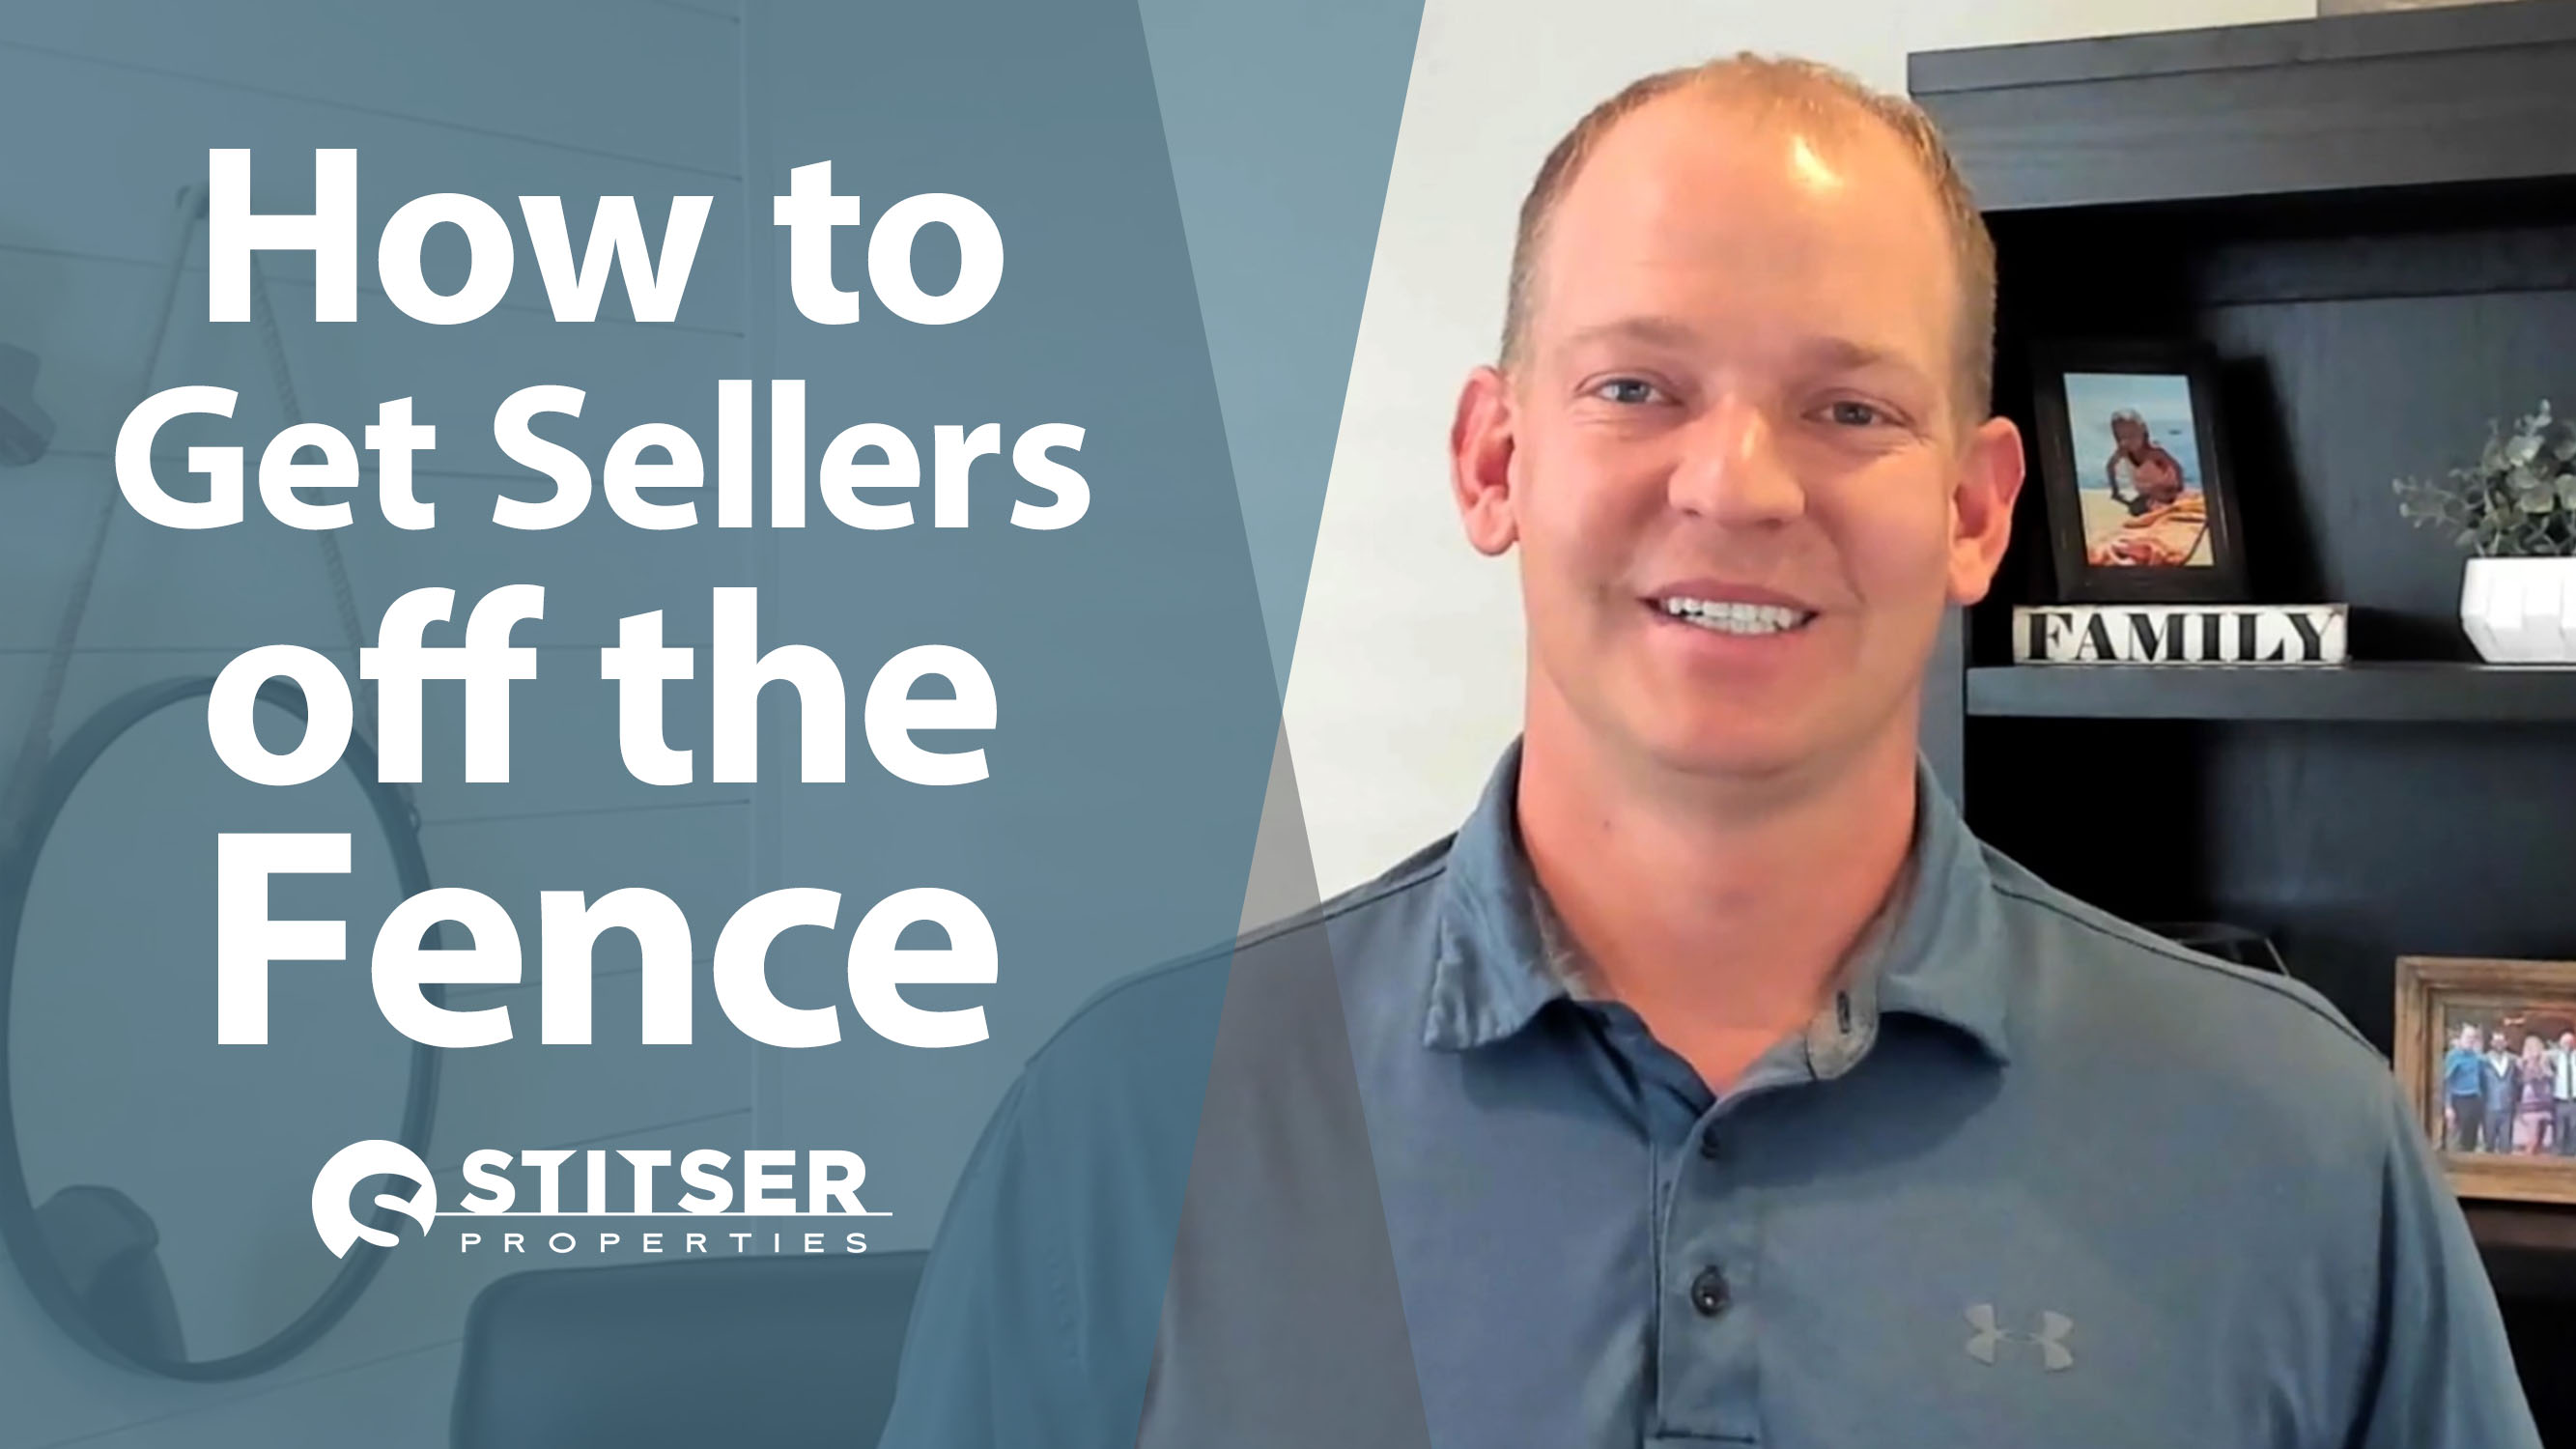 5 Tools for Getting Sellers Off the Fence